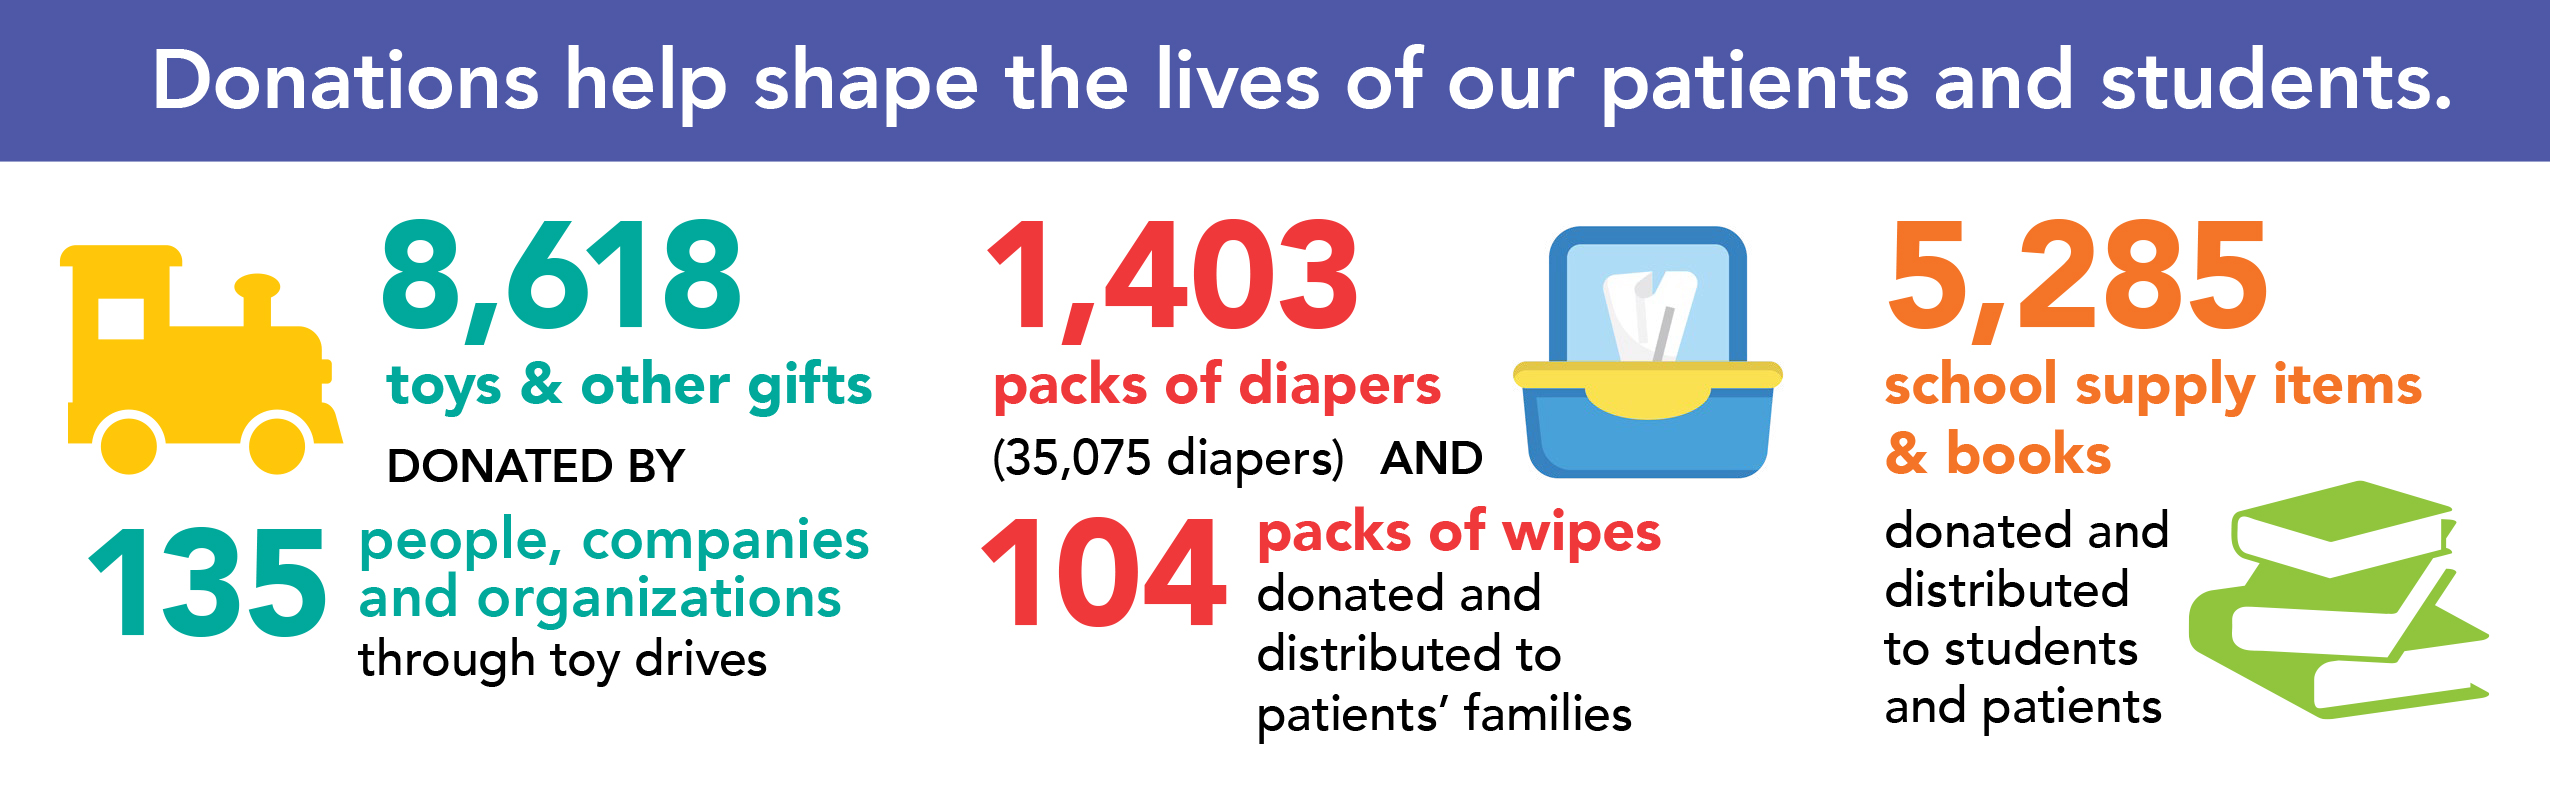 Infographic showing the amounts of different items donated to Kennedy Krieger in 2022: 8,618 toys and other gifts were donated by 135 people, companies and organizations through toy drives; 1,403 packs of diapers (35,075 diapers) and 104 packs of wipes were donated and distributed to patients’ families; and 5,285 school supply items and books were donated and distributed to students and patients.